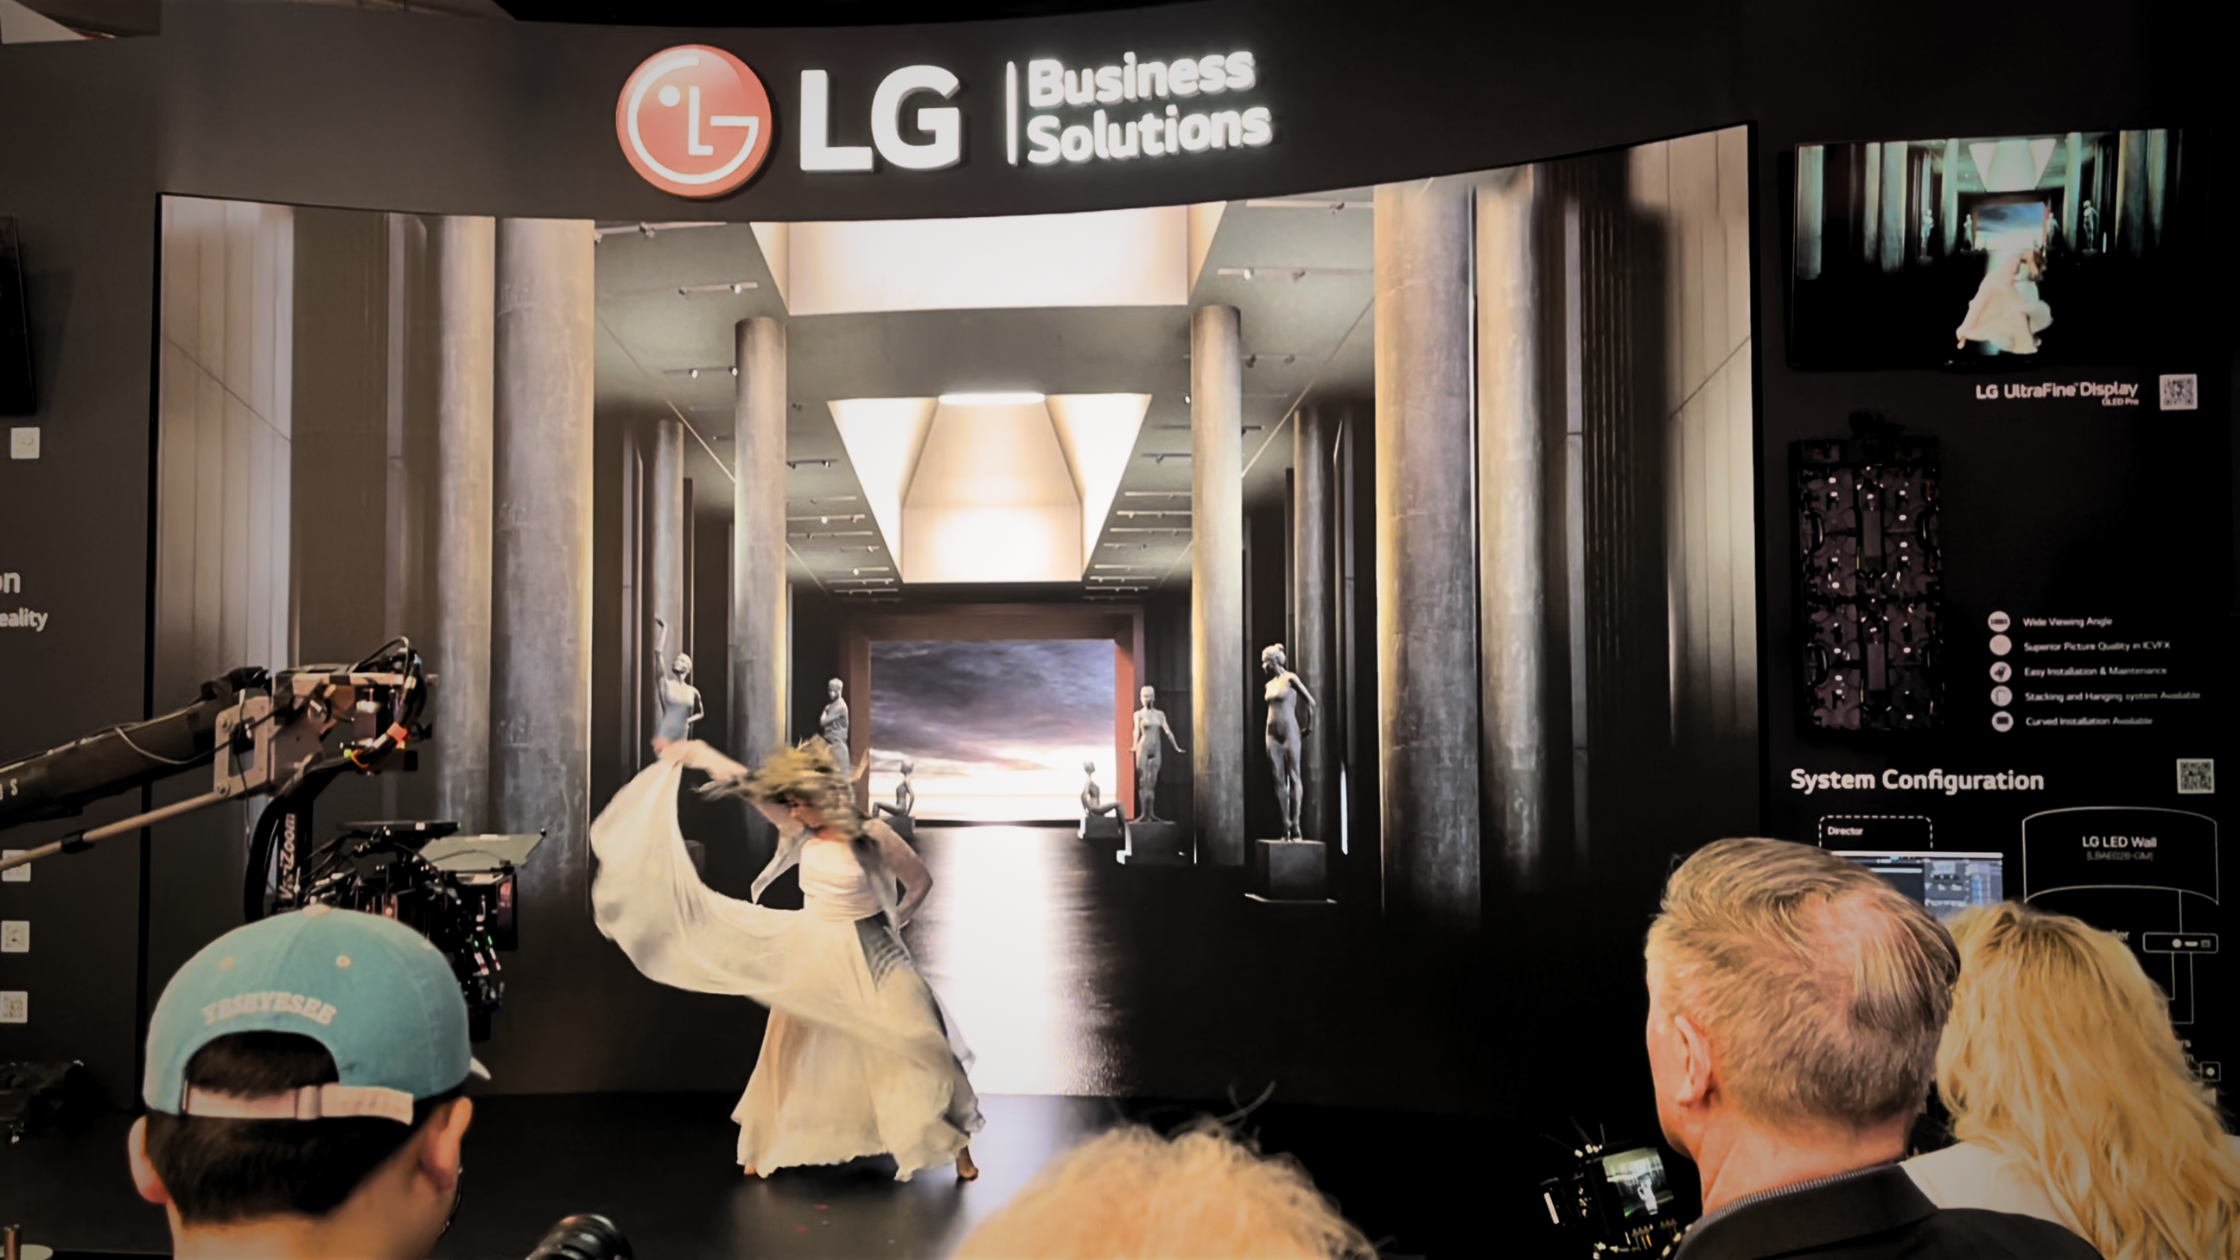 Ballet dancer in front of LG Business Systems screen display